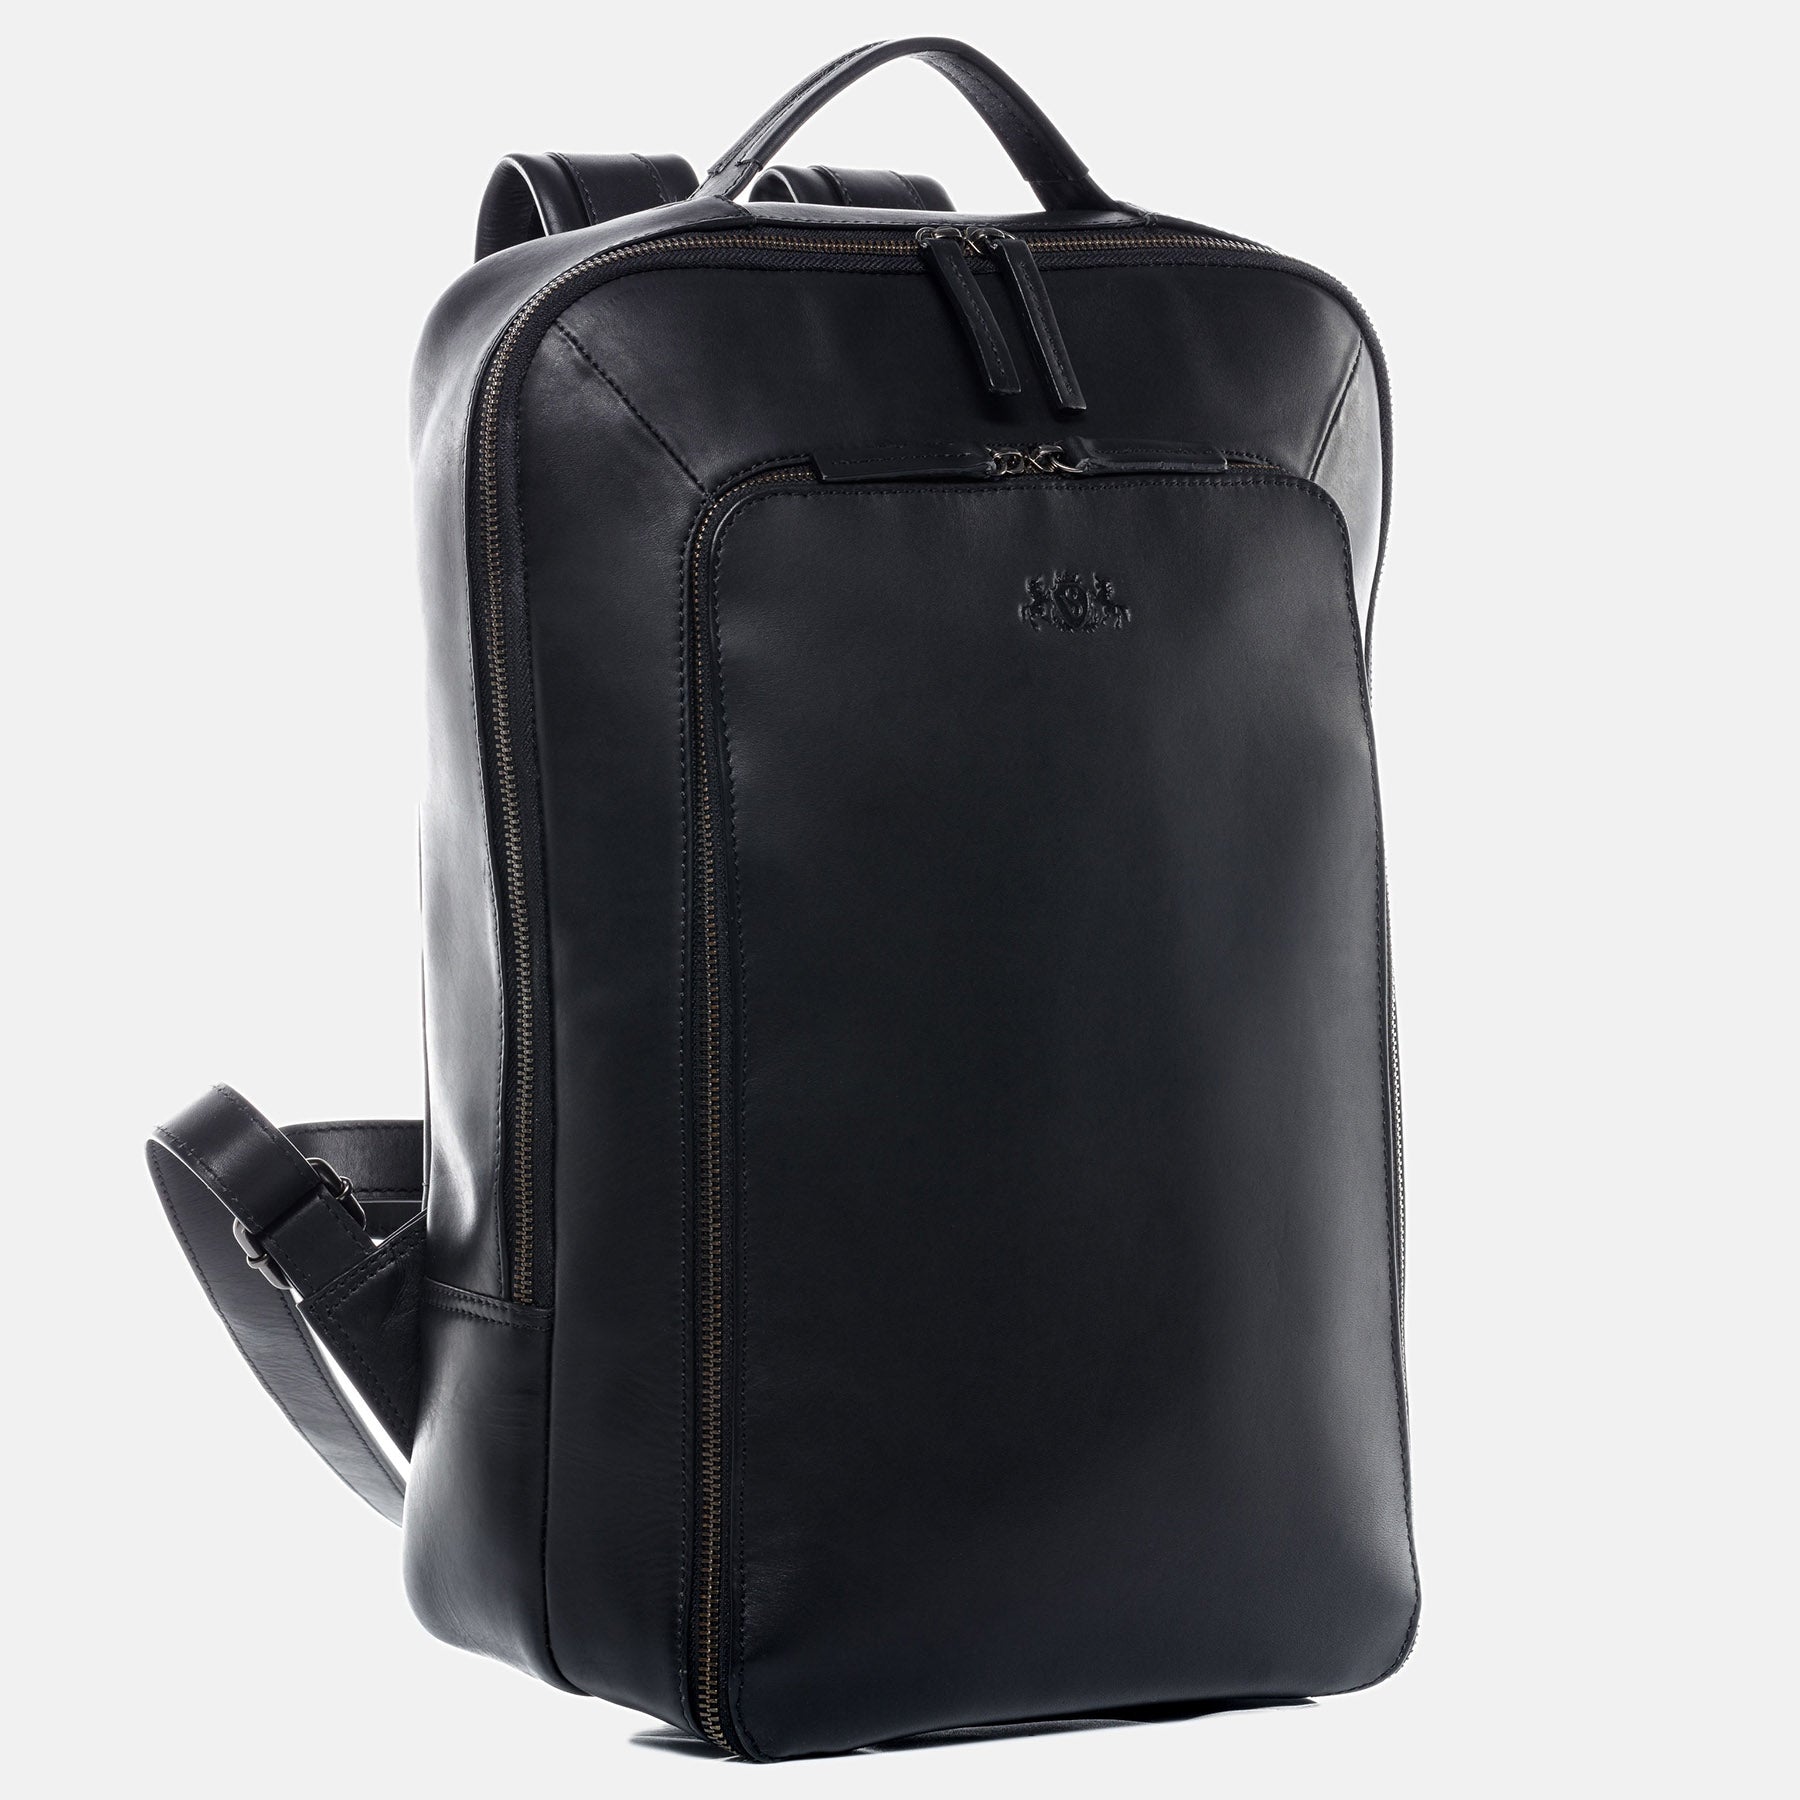 XL Backpack DYLAN smooth leather black